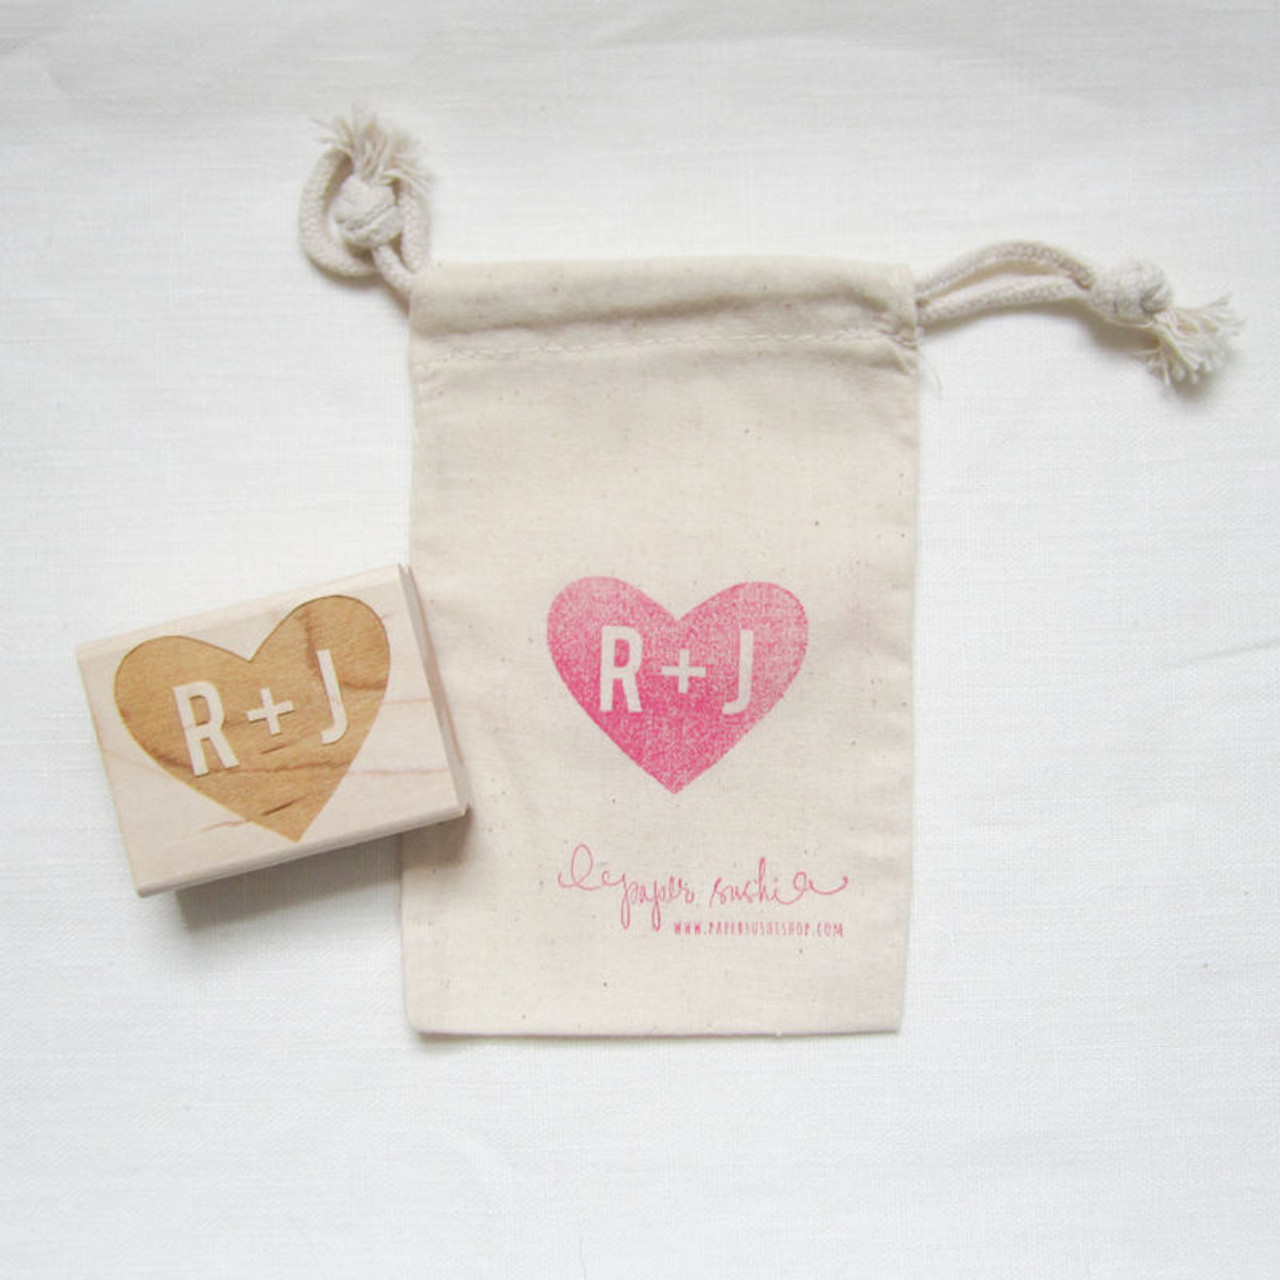 Carved Heart Initials Stamp by Paper Sushi